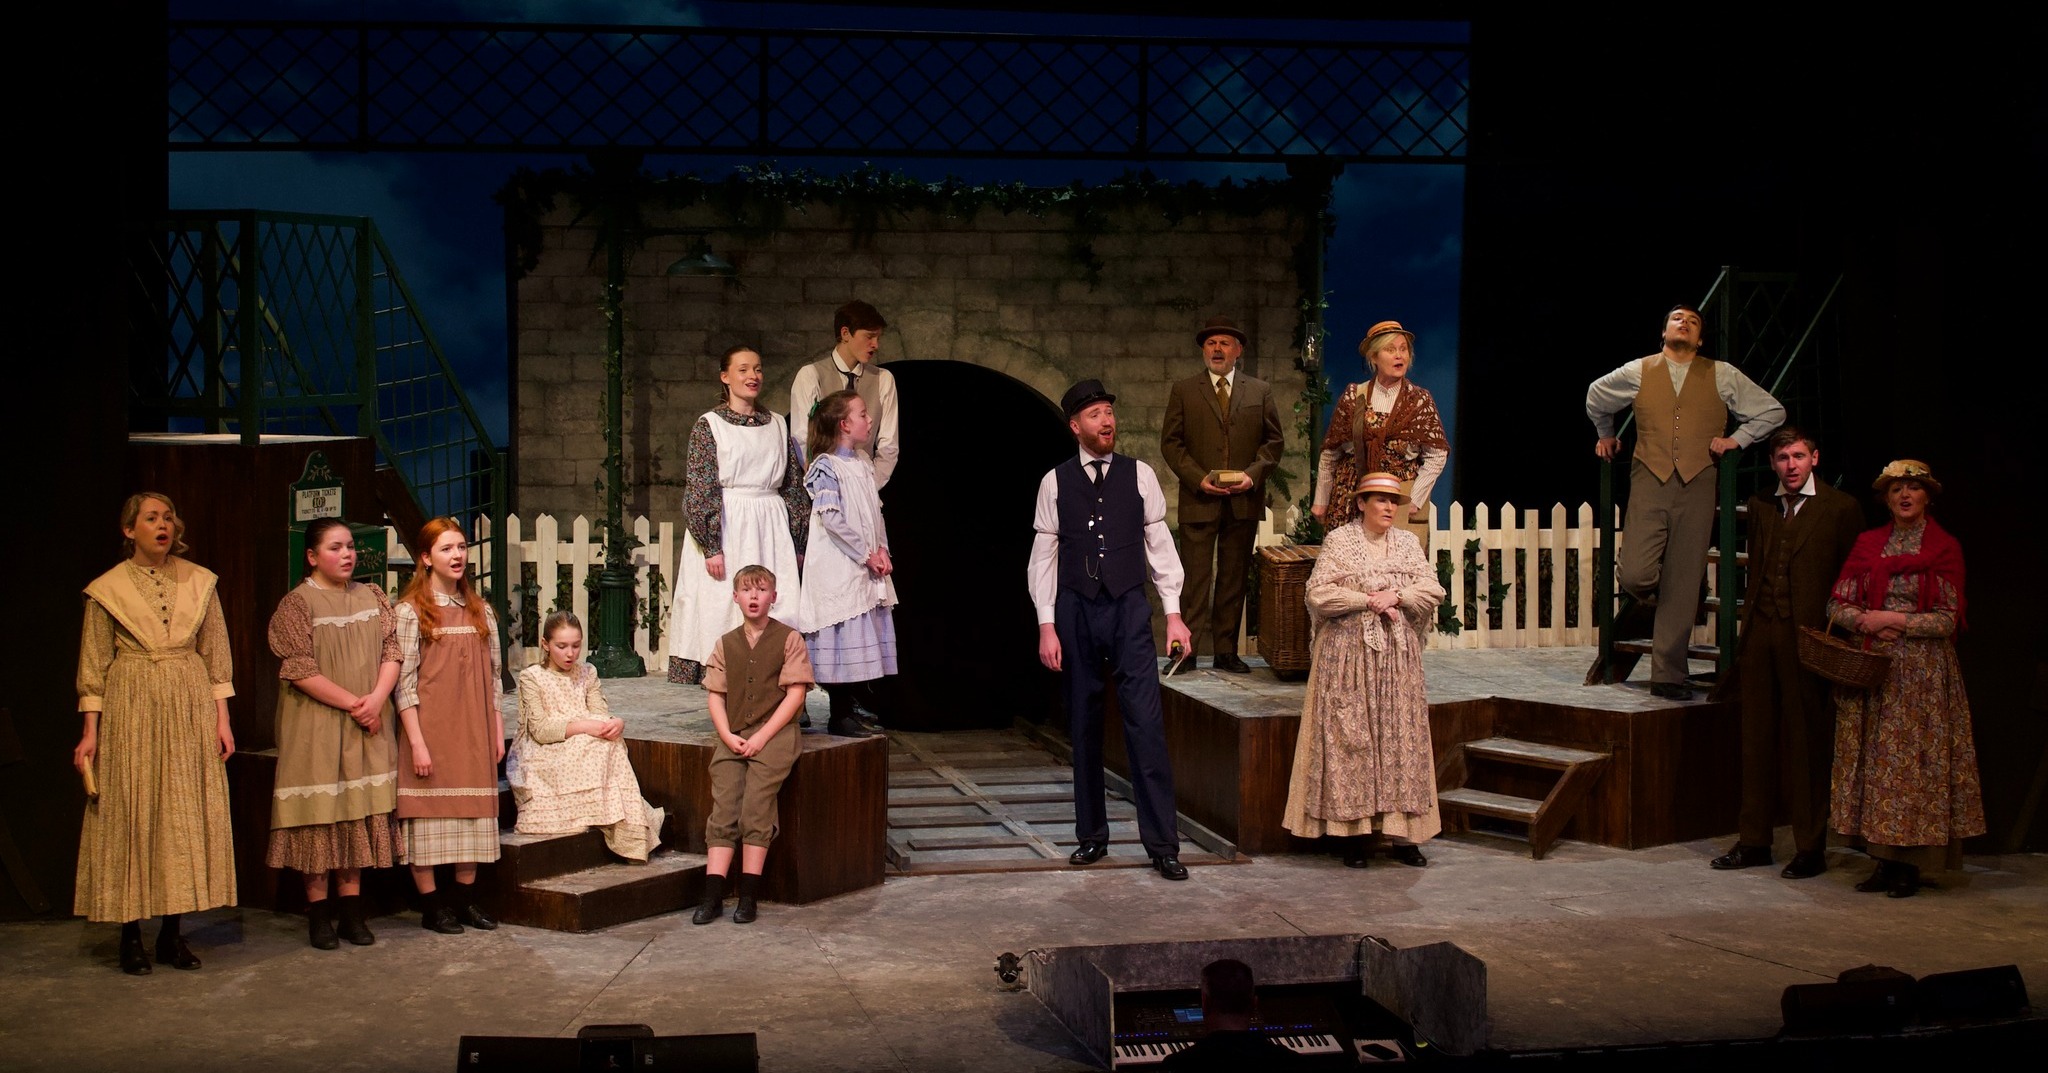 Image of the Railway Children production